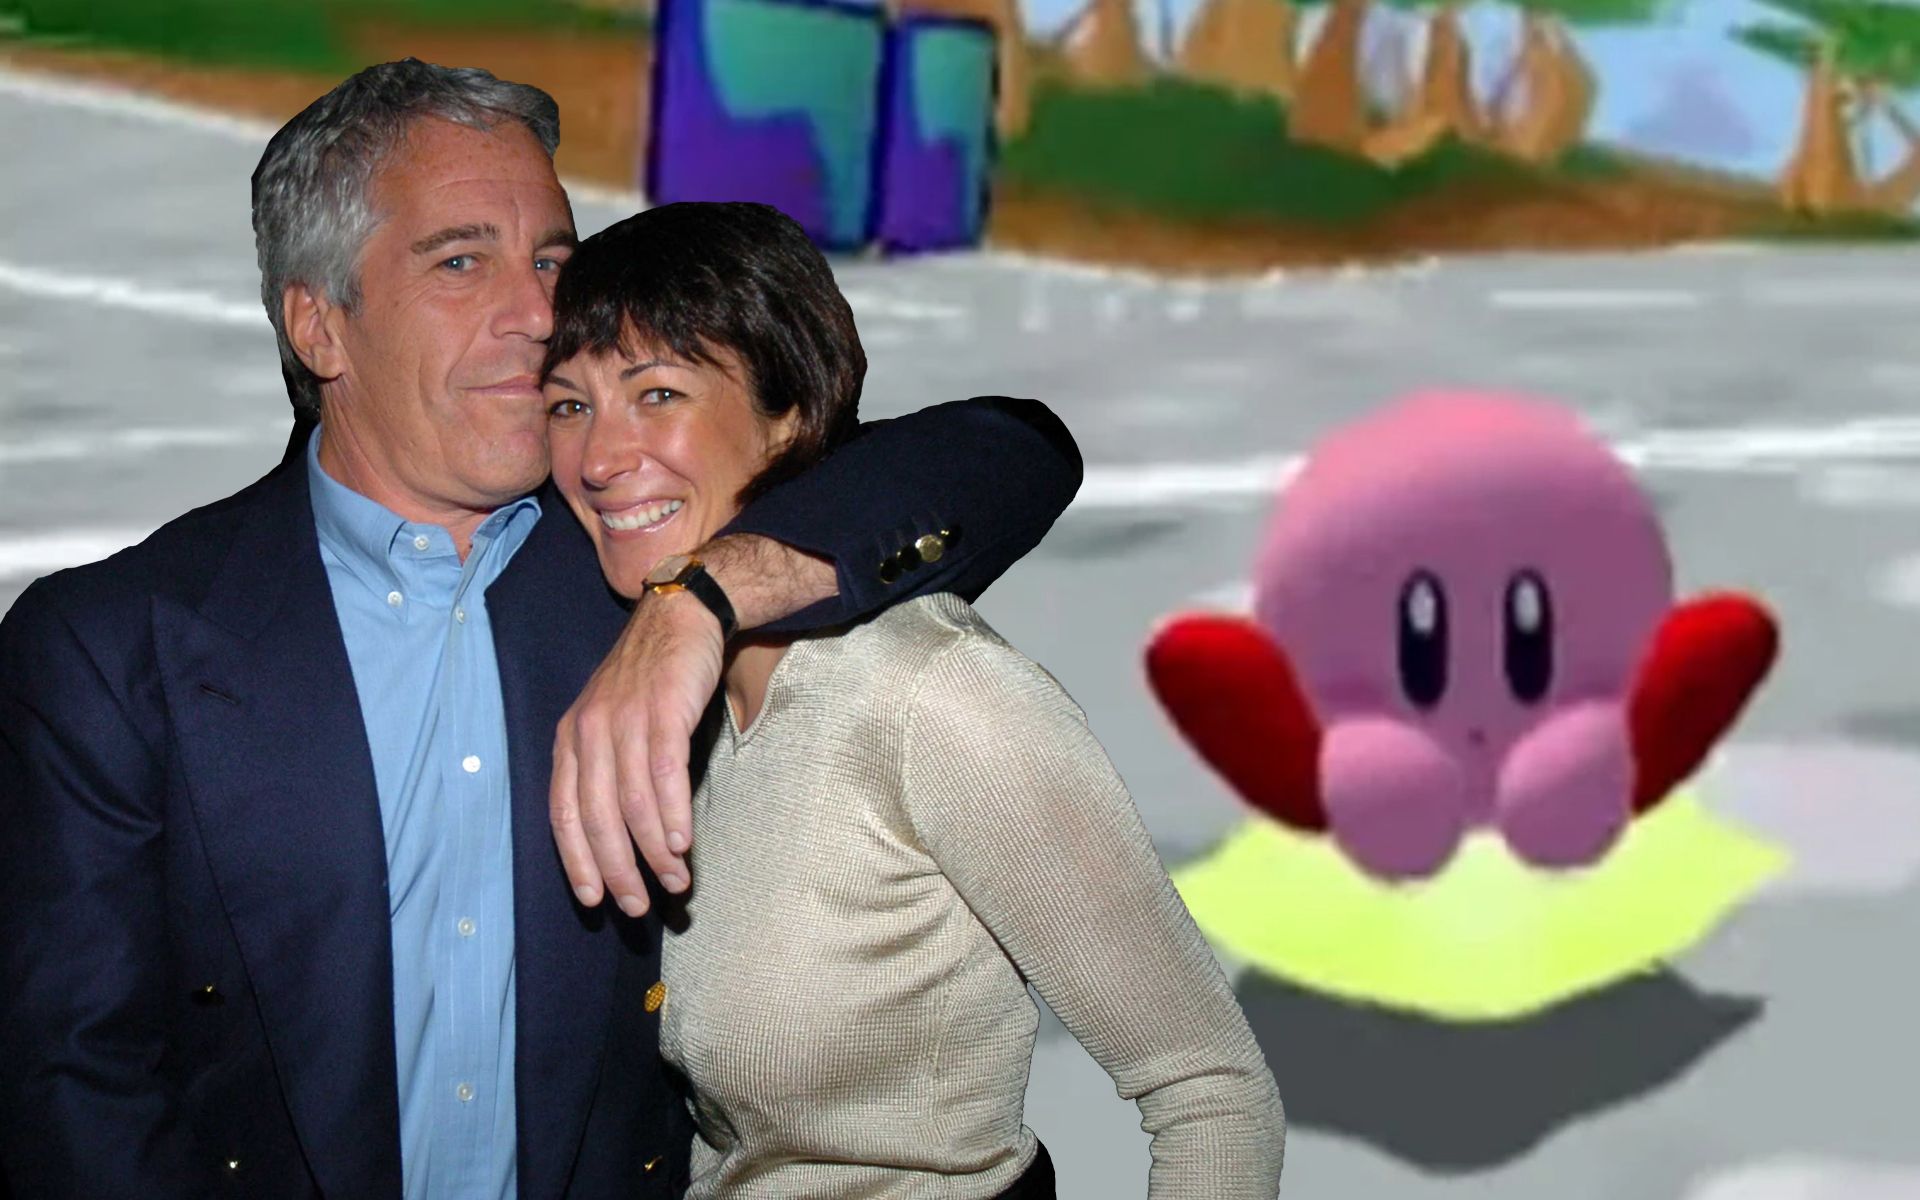 Ghislaine Maxwell: "The 1% Get High And Play Kirby Air Ride All Day"